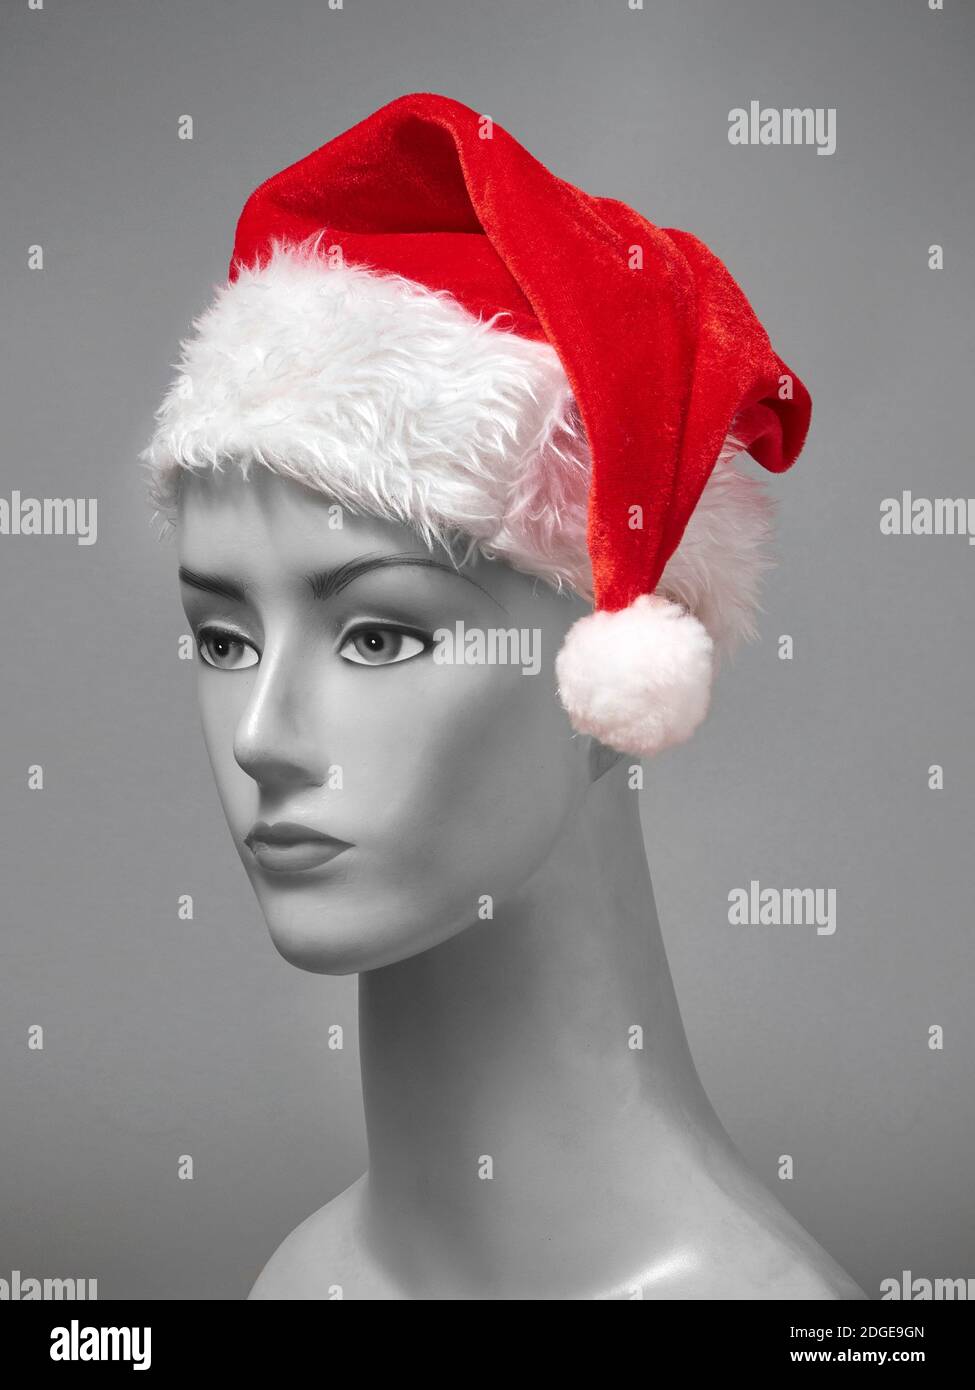 stock image of Santa Claus hat with grey mannequin Stock Photo